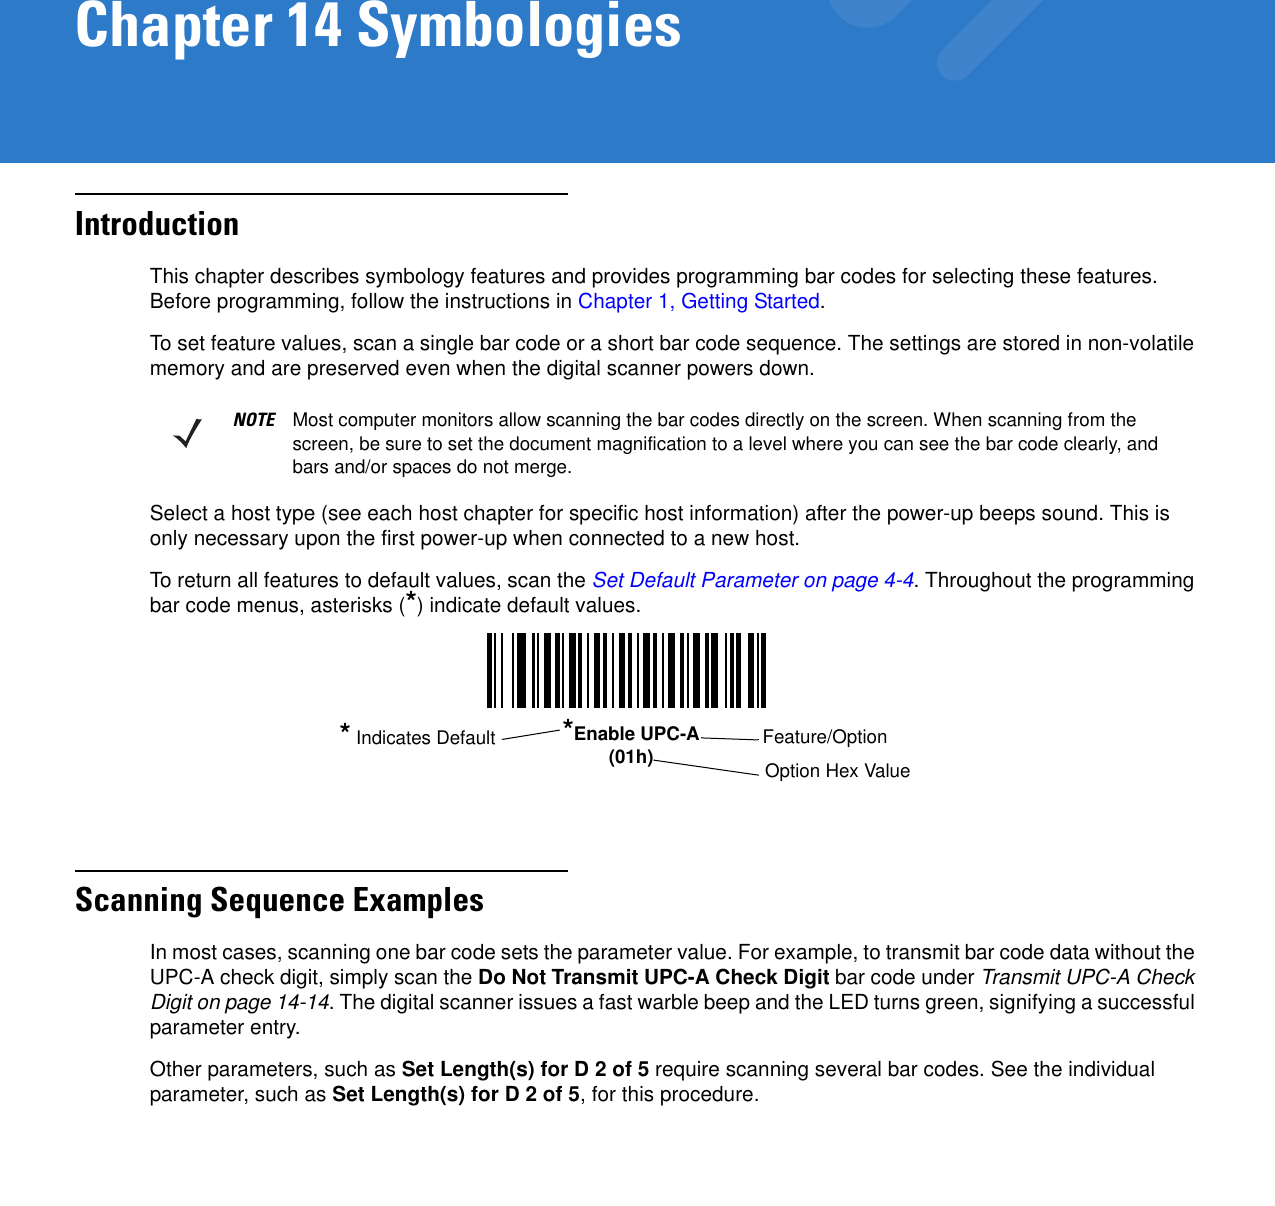 Chapter 14 SymbologiesIntroductionThis chapter describes symbology features and provides programming bar codes for selecting these features. Before programming, follow the instructions in Chapter 1, Getting Started.To set feature values, scan a single bar code or a short bar code sequence. The settings are stored in non-volatile memory and are preserved even when the digital scanner powers down.Select a host type (see each host chapter for specific host information) after the power-up beeps sound. This is only necessary upon the first power-up when connected to a new host.To return all features to default values, scan the Set Default Parameter on page 4-4. Throughout the programming bar code menus, asterisks (*) indicate default values.Scanning Sequence ExamplesIn most cases, scanning one bar code sets the parameter value. For example, to transmit bar code data without the UPC-A check digit, simply scan the Do Not Transmit UPC-A Check Digit bar code under Transmit UPC-A Check Digit on page 14-14. The digital scanner issues a fast warble beep and the LED turns green, signifying a successful parameter entry.Other parameters, such as Set Length(s) for D 2 of 5 require scanning several bar codes. See the individual parameter, such as Set Length(s) for D 2 of 5, for this procedure.NOTE Most computer monitors allow scanning the bar codes directly on the screen. When scanning from the screen, be sure to set the document magnification to a level where you can see the bar code clearly, and bars and/or spaces do not merge.*Enable UPC-A(01h) Feature/Option* Indicates DefaultOption Hex Value 